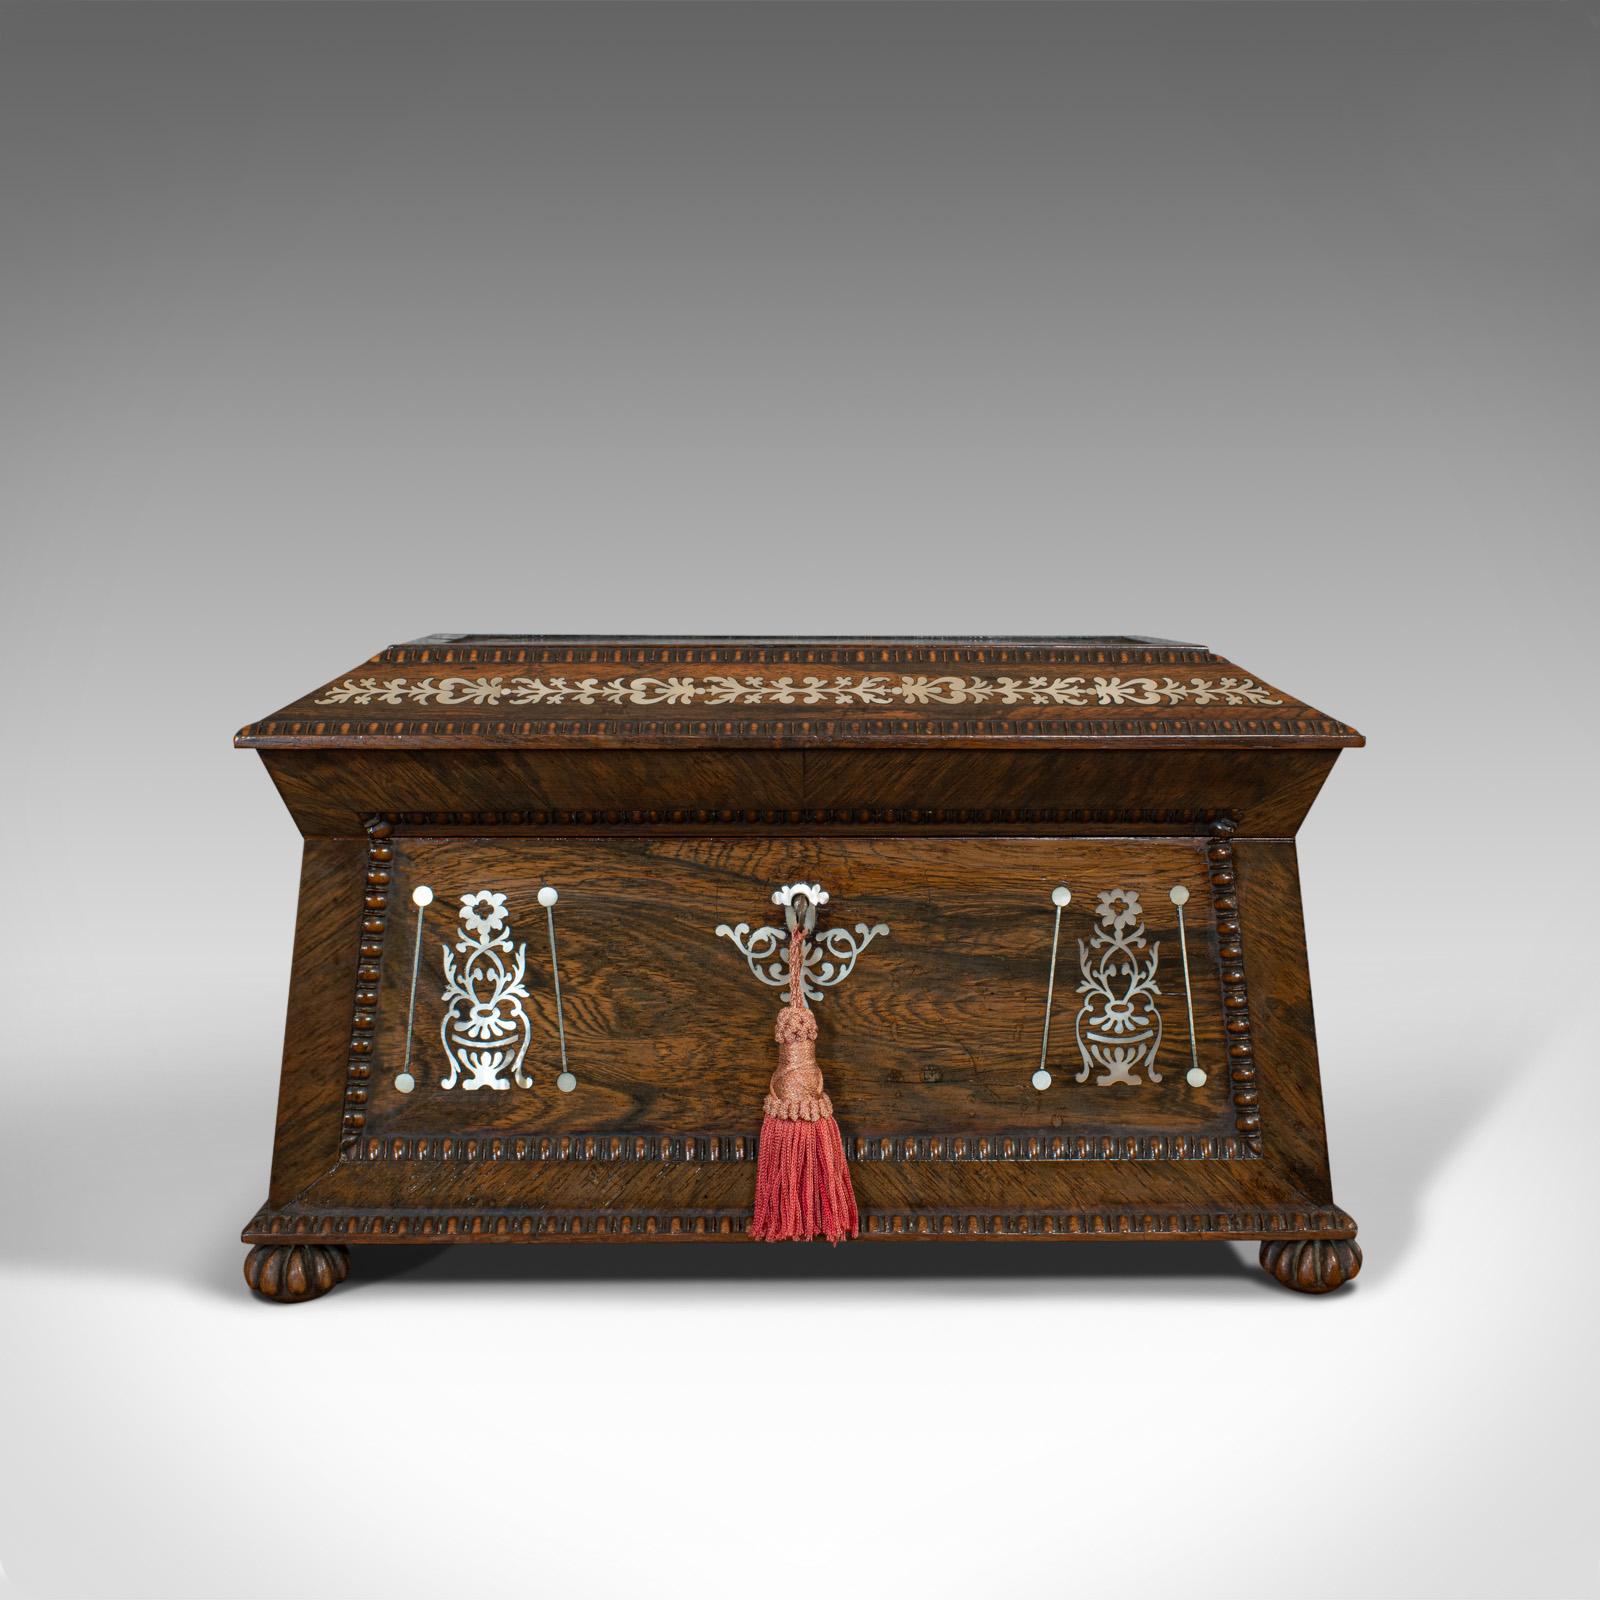 This is an ornate antique tea caddy. An English, rosewood sarcophagus chest with mother of pearl inlay, dating to the Regency period, circa 1820.

Make tea drinking an event with this beautiful caddy
Displays a desirable aged patina
Superb grain